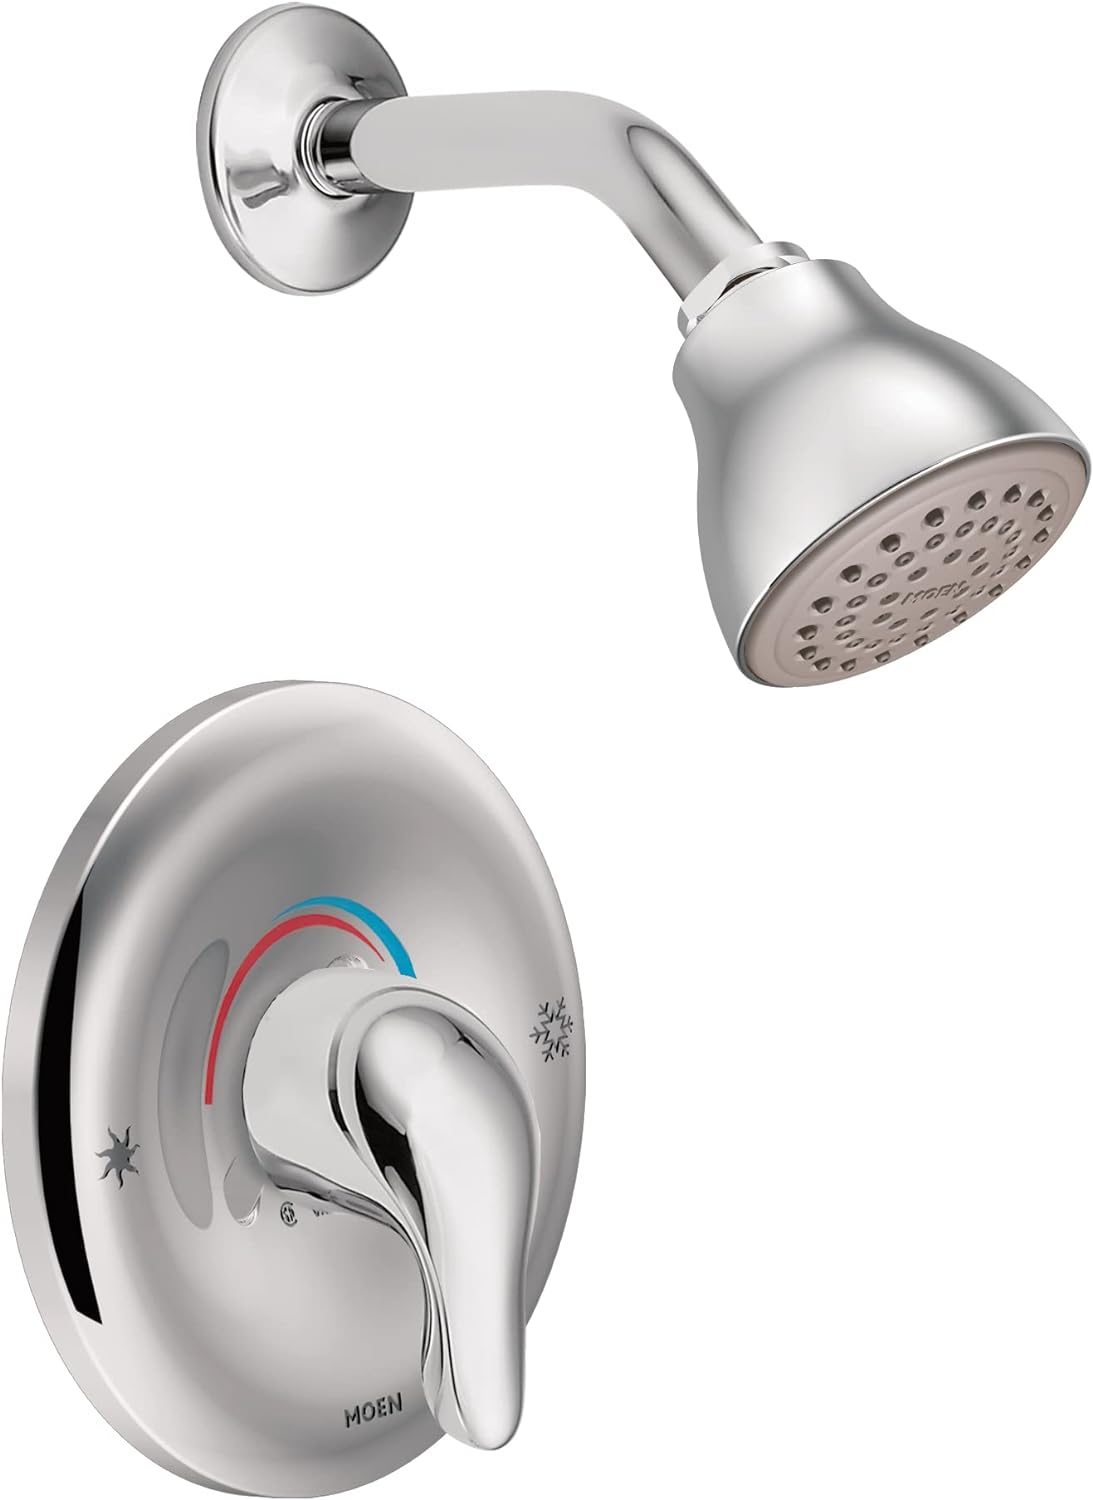 Moen Chrome Single Function Eco-Performance Shower Trim, featuring Showerhead and Shower Lever Handle for Water Temperature Adjustment (Posi-Temp Valve Required), TL182EP